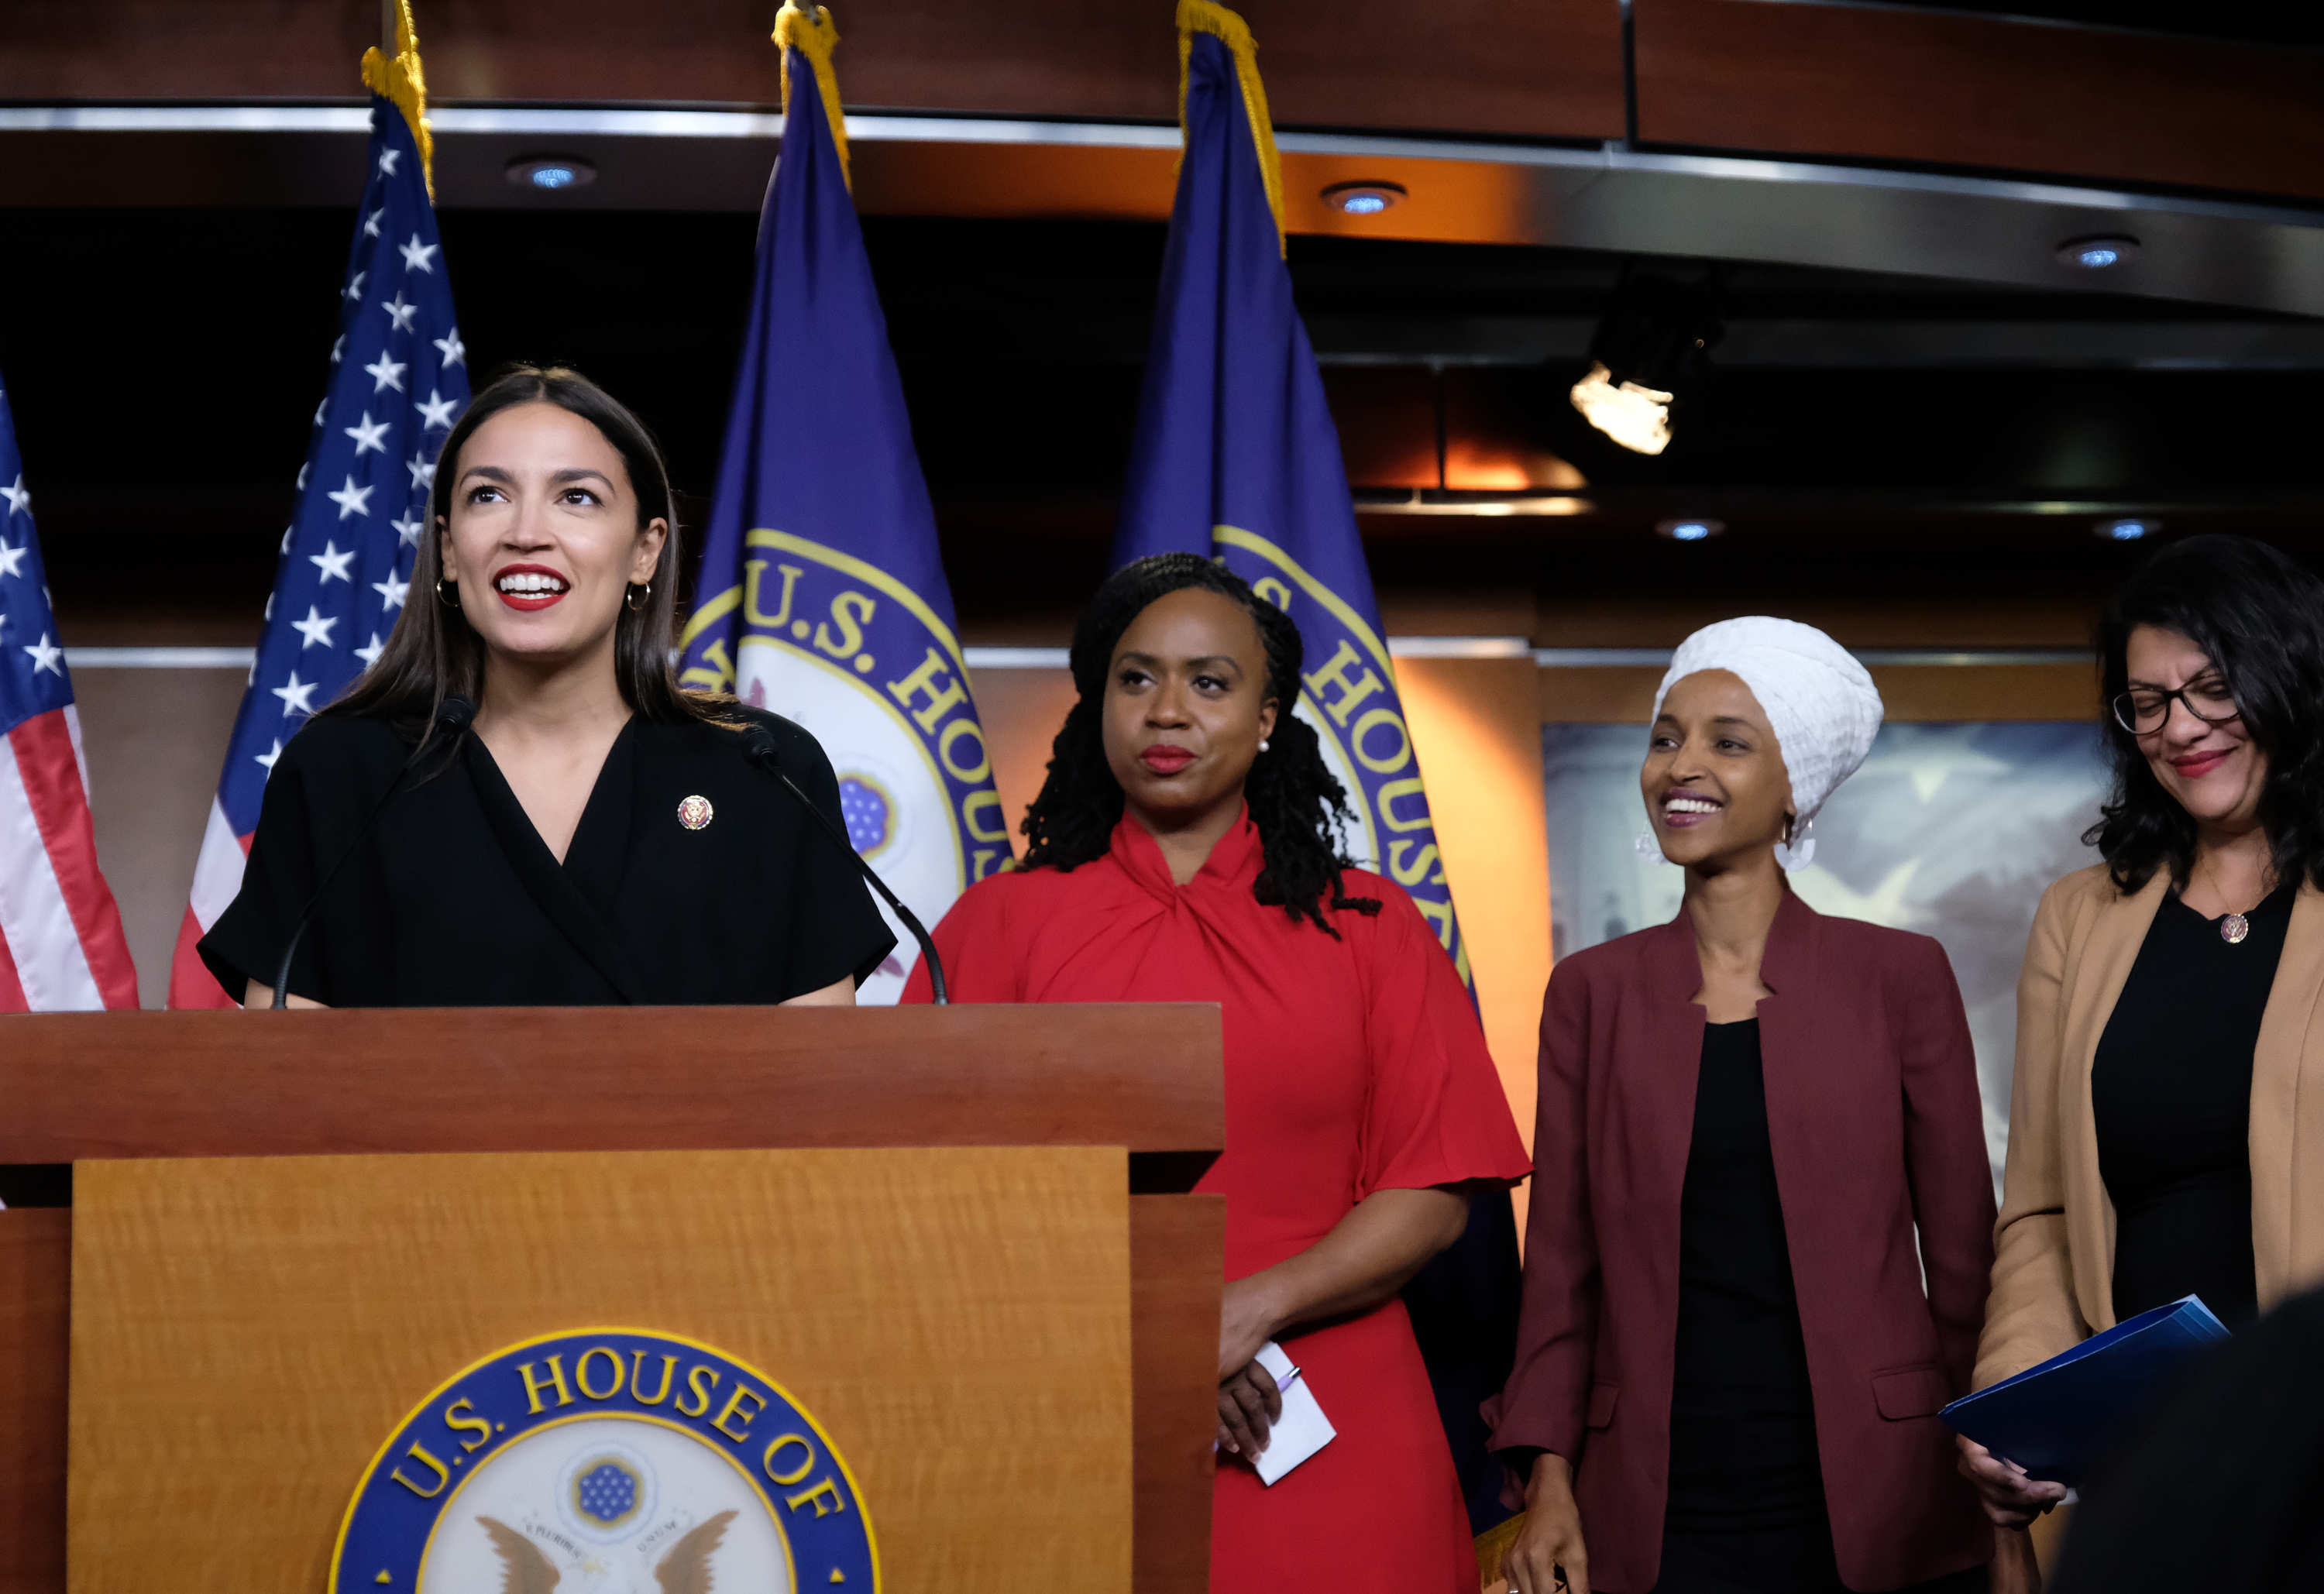 U.S. Rep. Alexandria Ocasio-Cortez (D-NY) speaks as Reps. Ayanna Pressley (D-MA), Ilhan Omar (D-MN), and Rashida Tlaib (D-MI) listen during a press conference at the U.S. Capitol on July 15, 2019 in Washington, DC. President Donald Trump stepped up his attacks on four progressive Democratic congresswomen, saying if they're not happy in the United States "they can leave." (Photo by Alex Wroblewski/Getty Images)